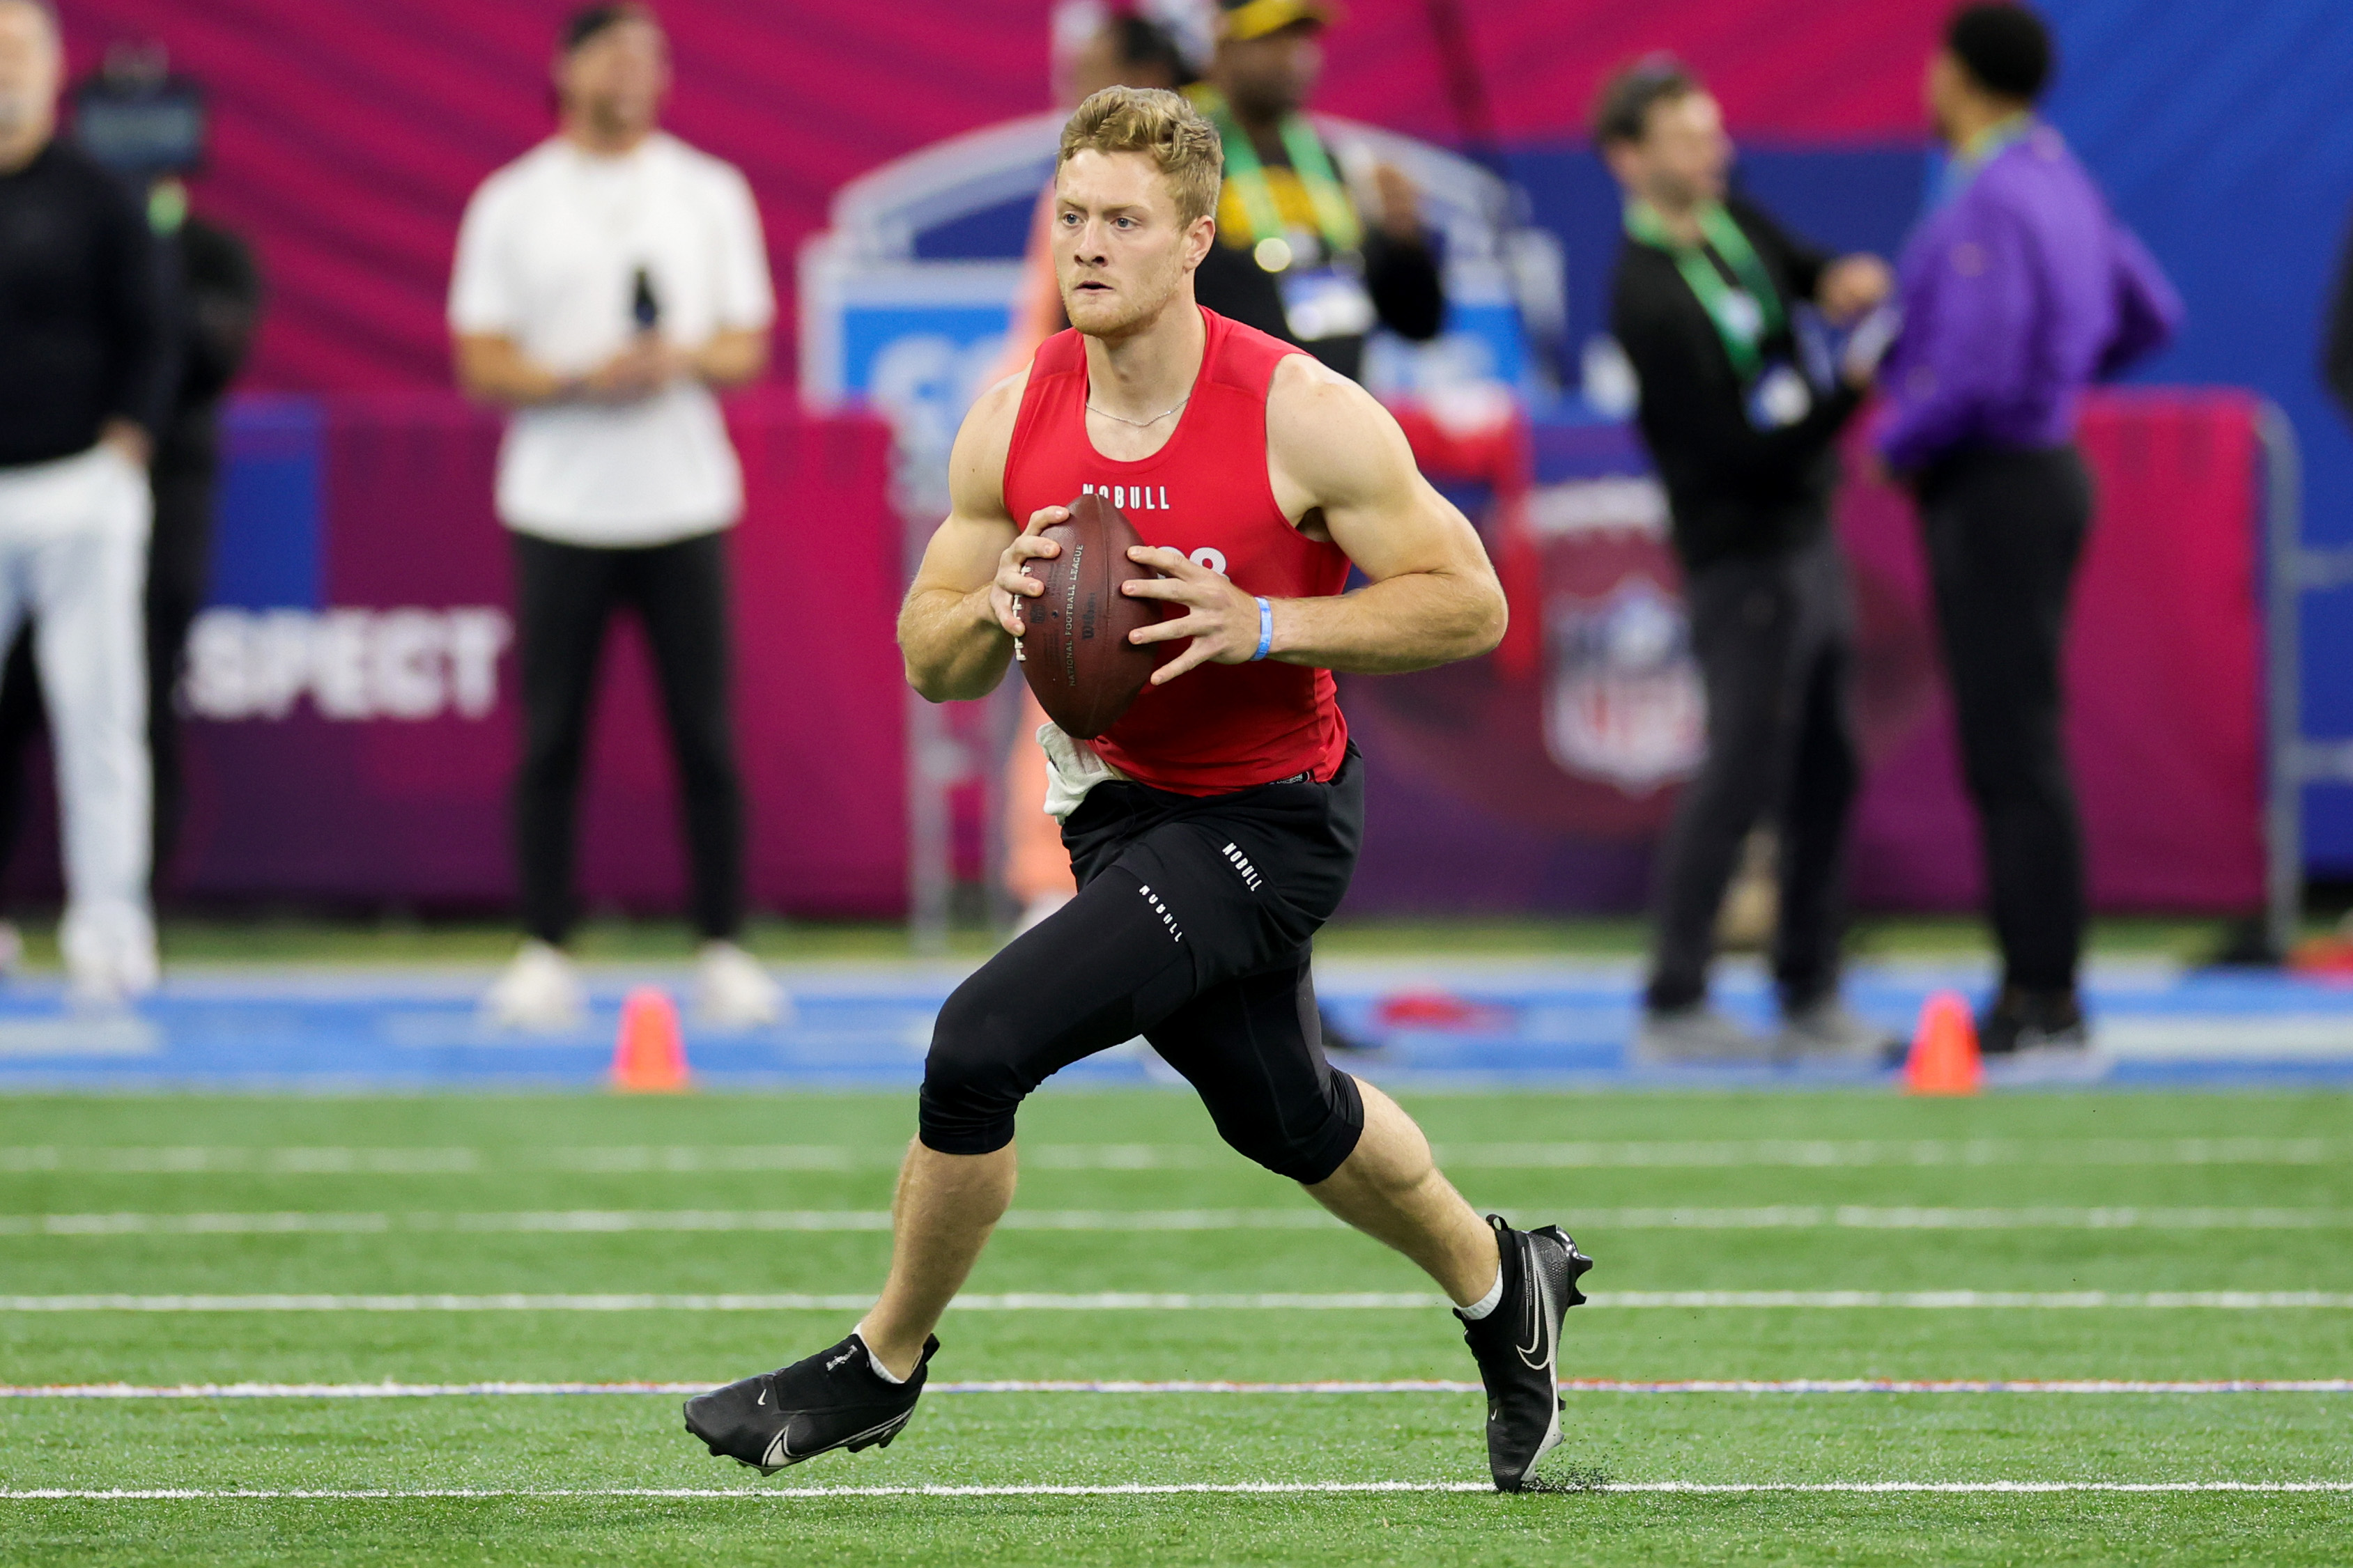 Quarterback Will Levis of the University of Kentucky works at the NFL Combine at Lucas Oil Stadium in Indianapolis, Indiana, March 4, 2023. /CFP